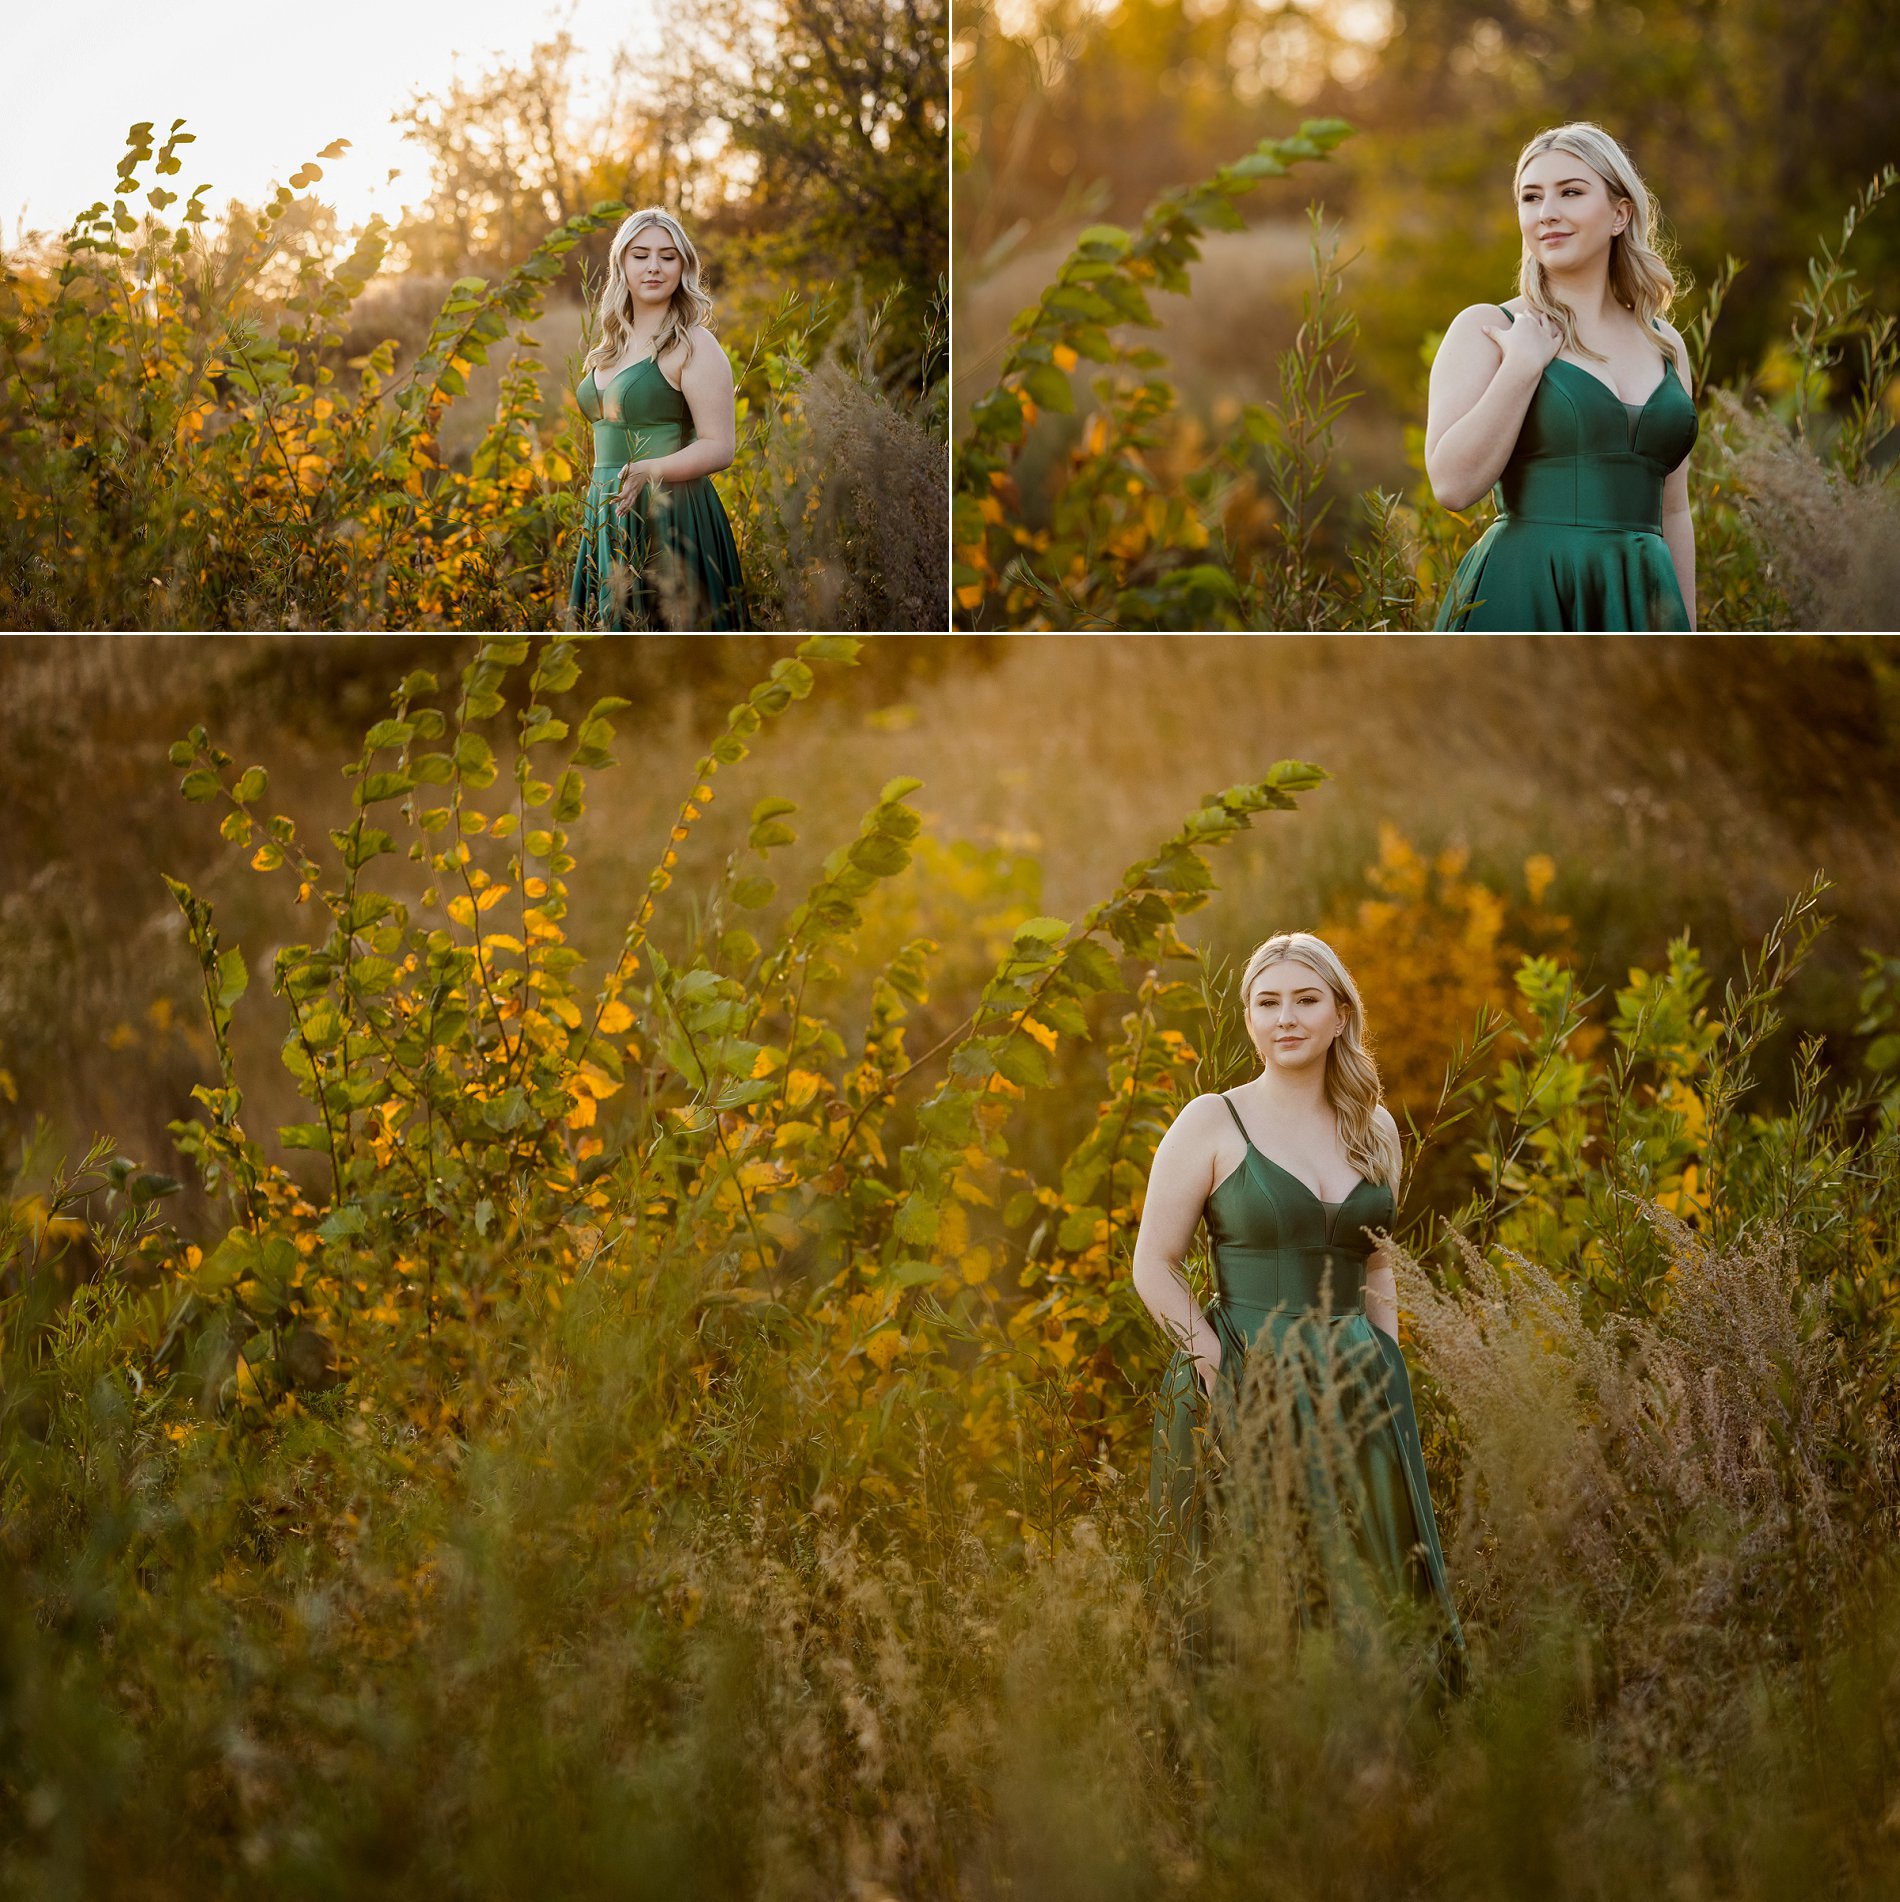 Graduation portraits with autumn colors in the tall grass